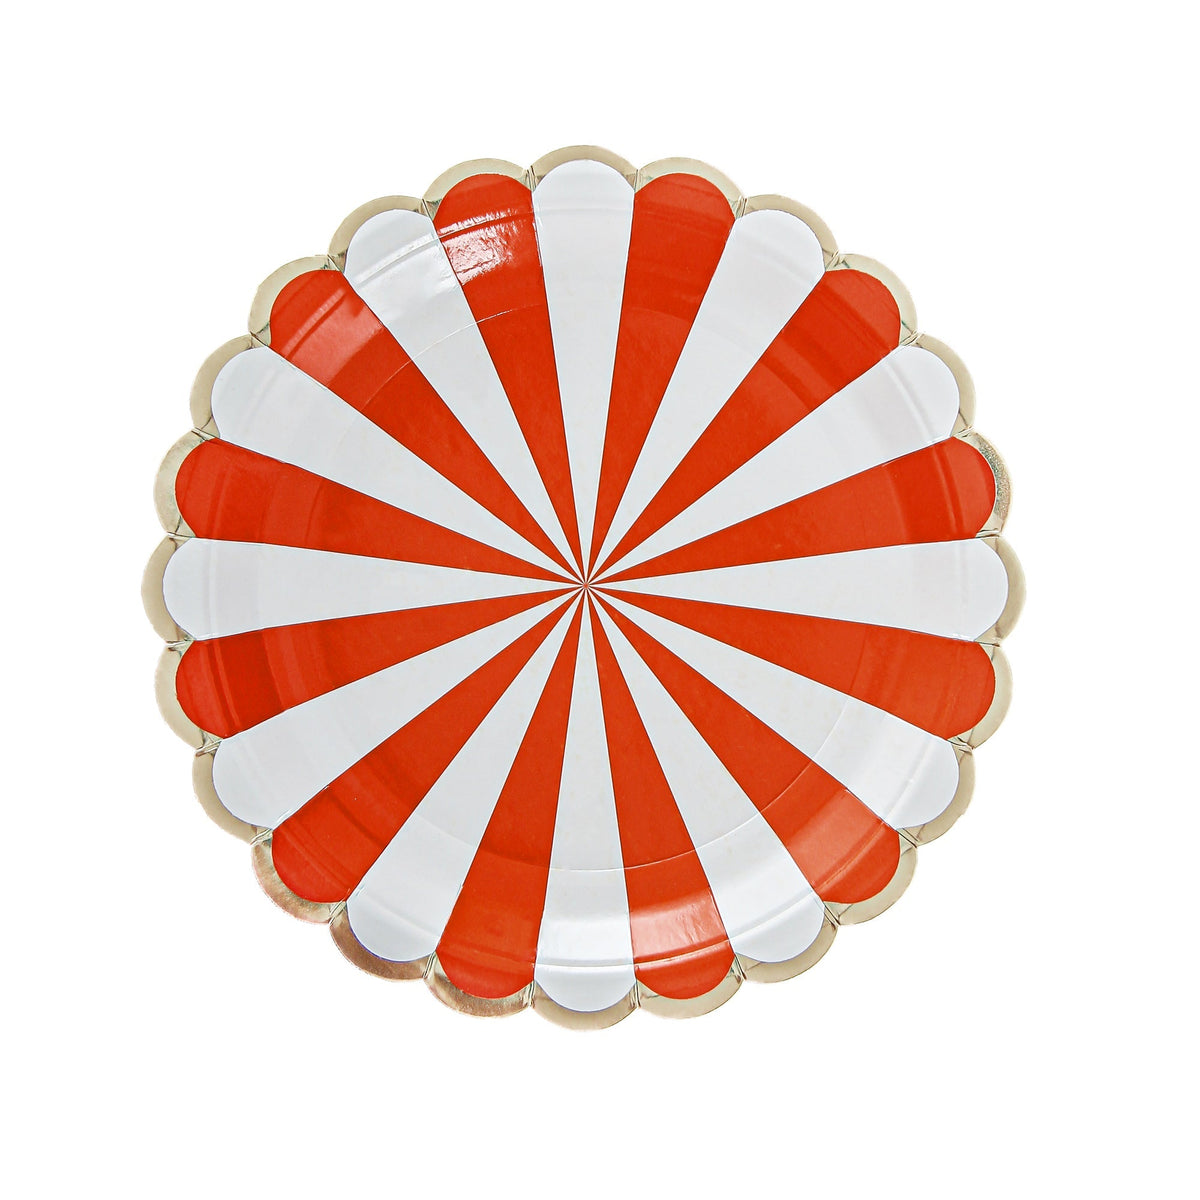 YIWU SANDY PAPER PRODUCTS CO., LTD Everyday Entertaining Carnival Small Dessert Paper Plates, Red, 7 Inches, 8 Count